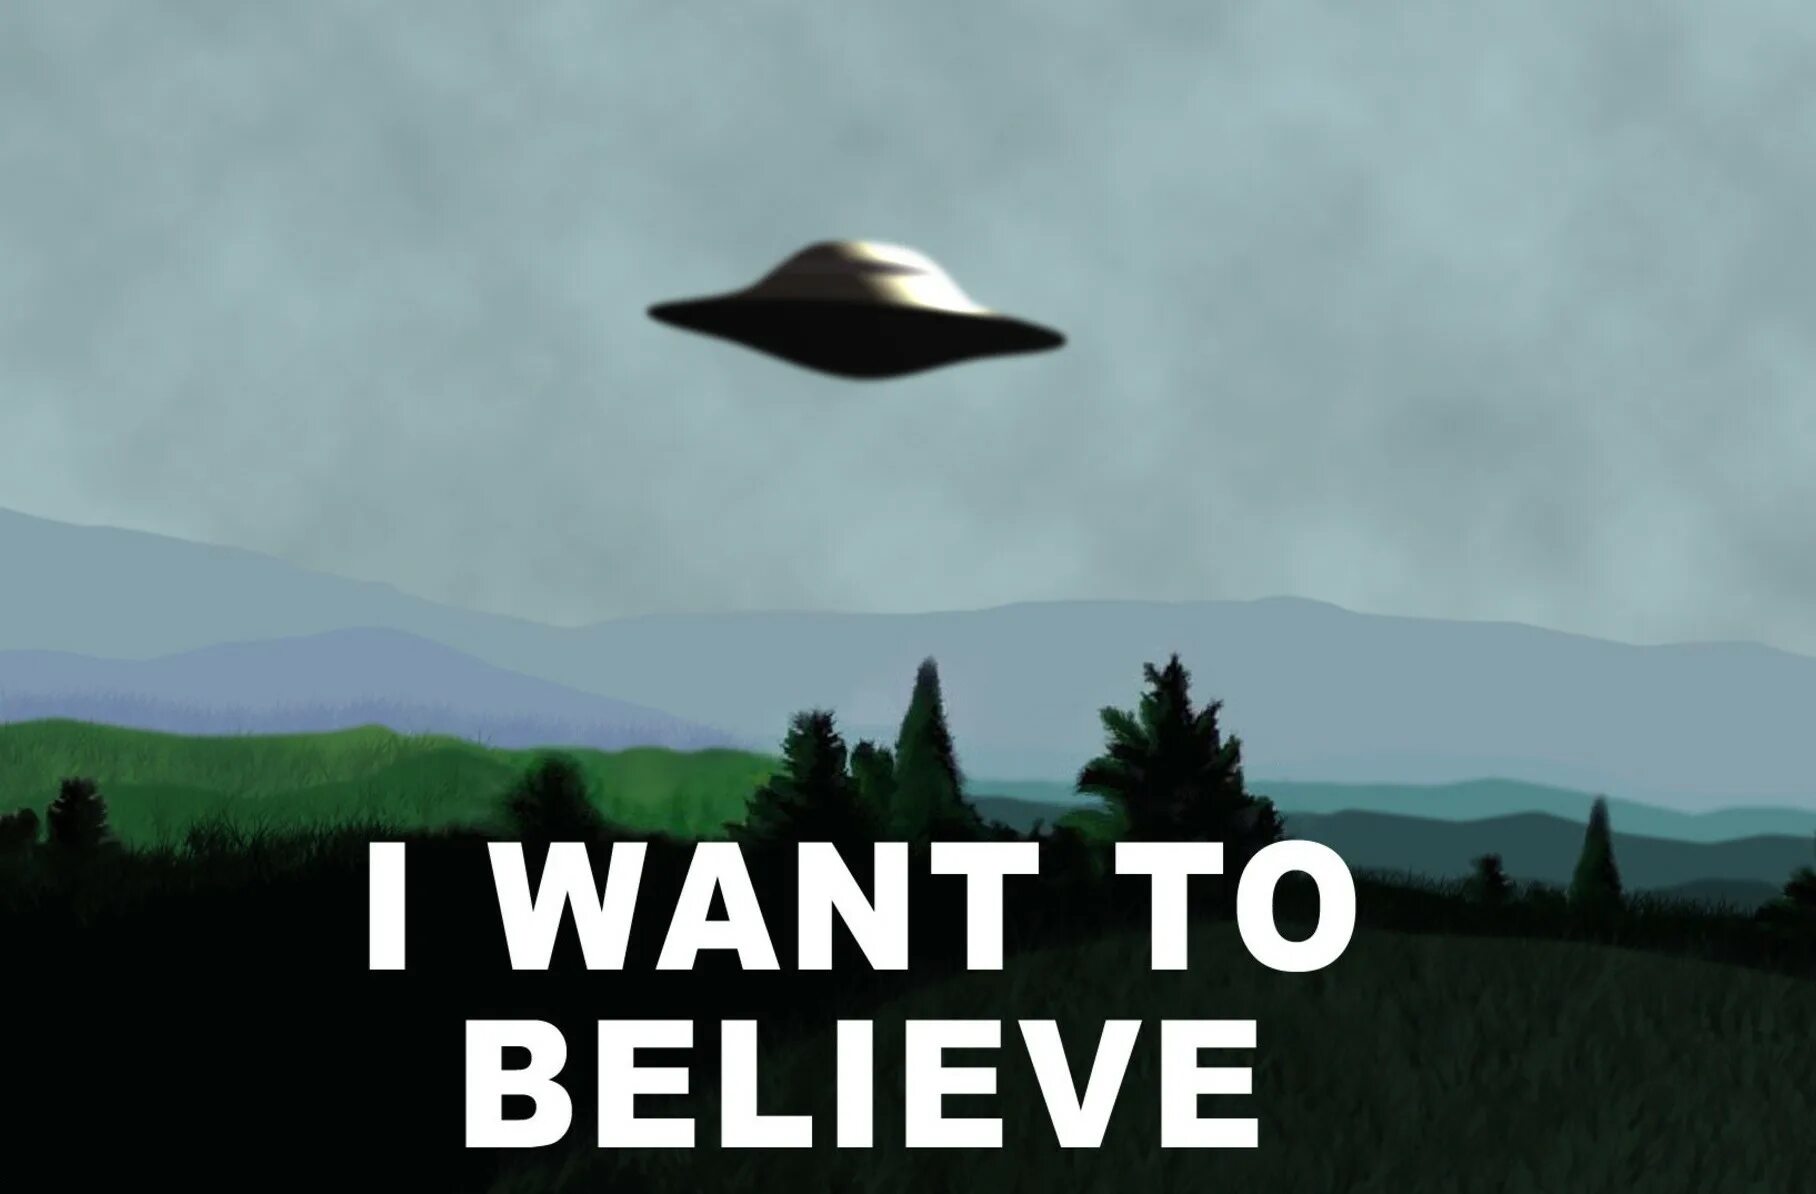 I want easy. Плакат секретные материалы i want to believe. I want to believe Постер Малдера. Постер x files i want to believe. Секретные материалы хочу верить плакат.